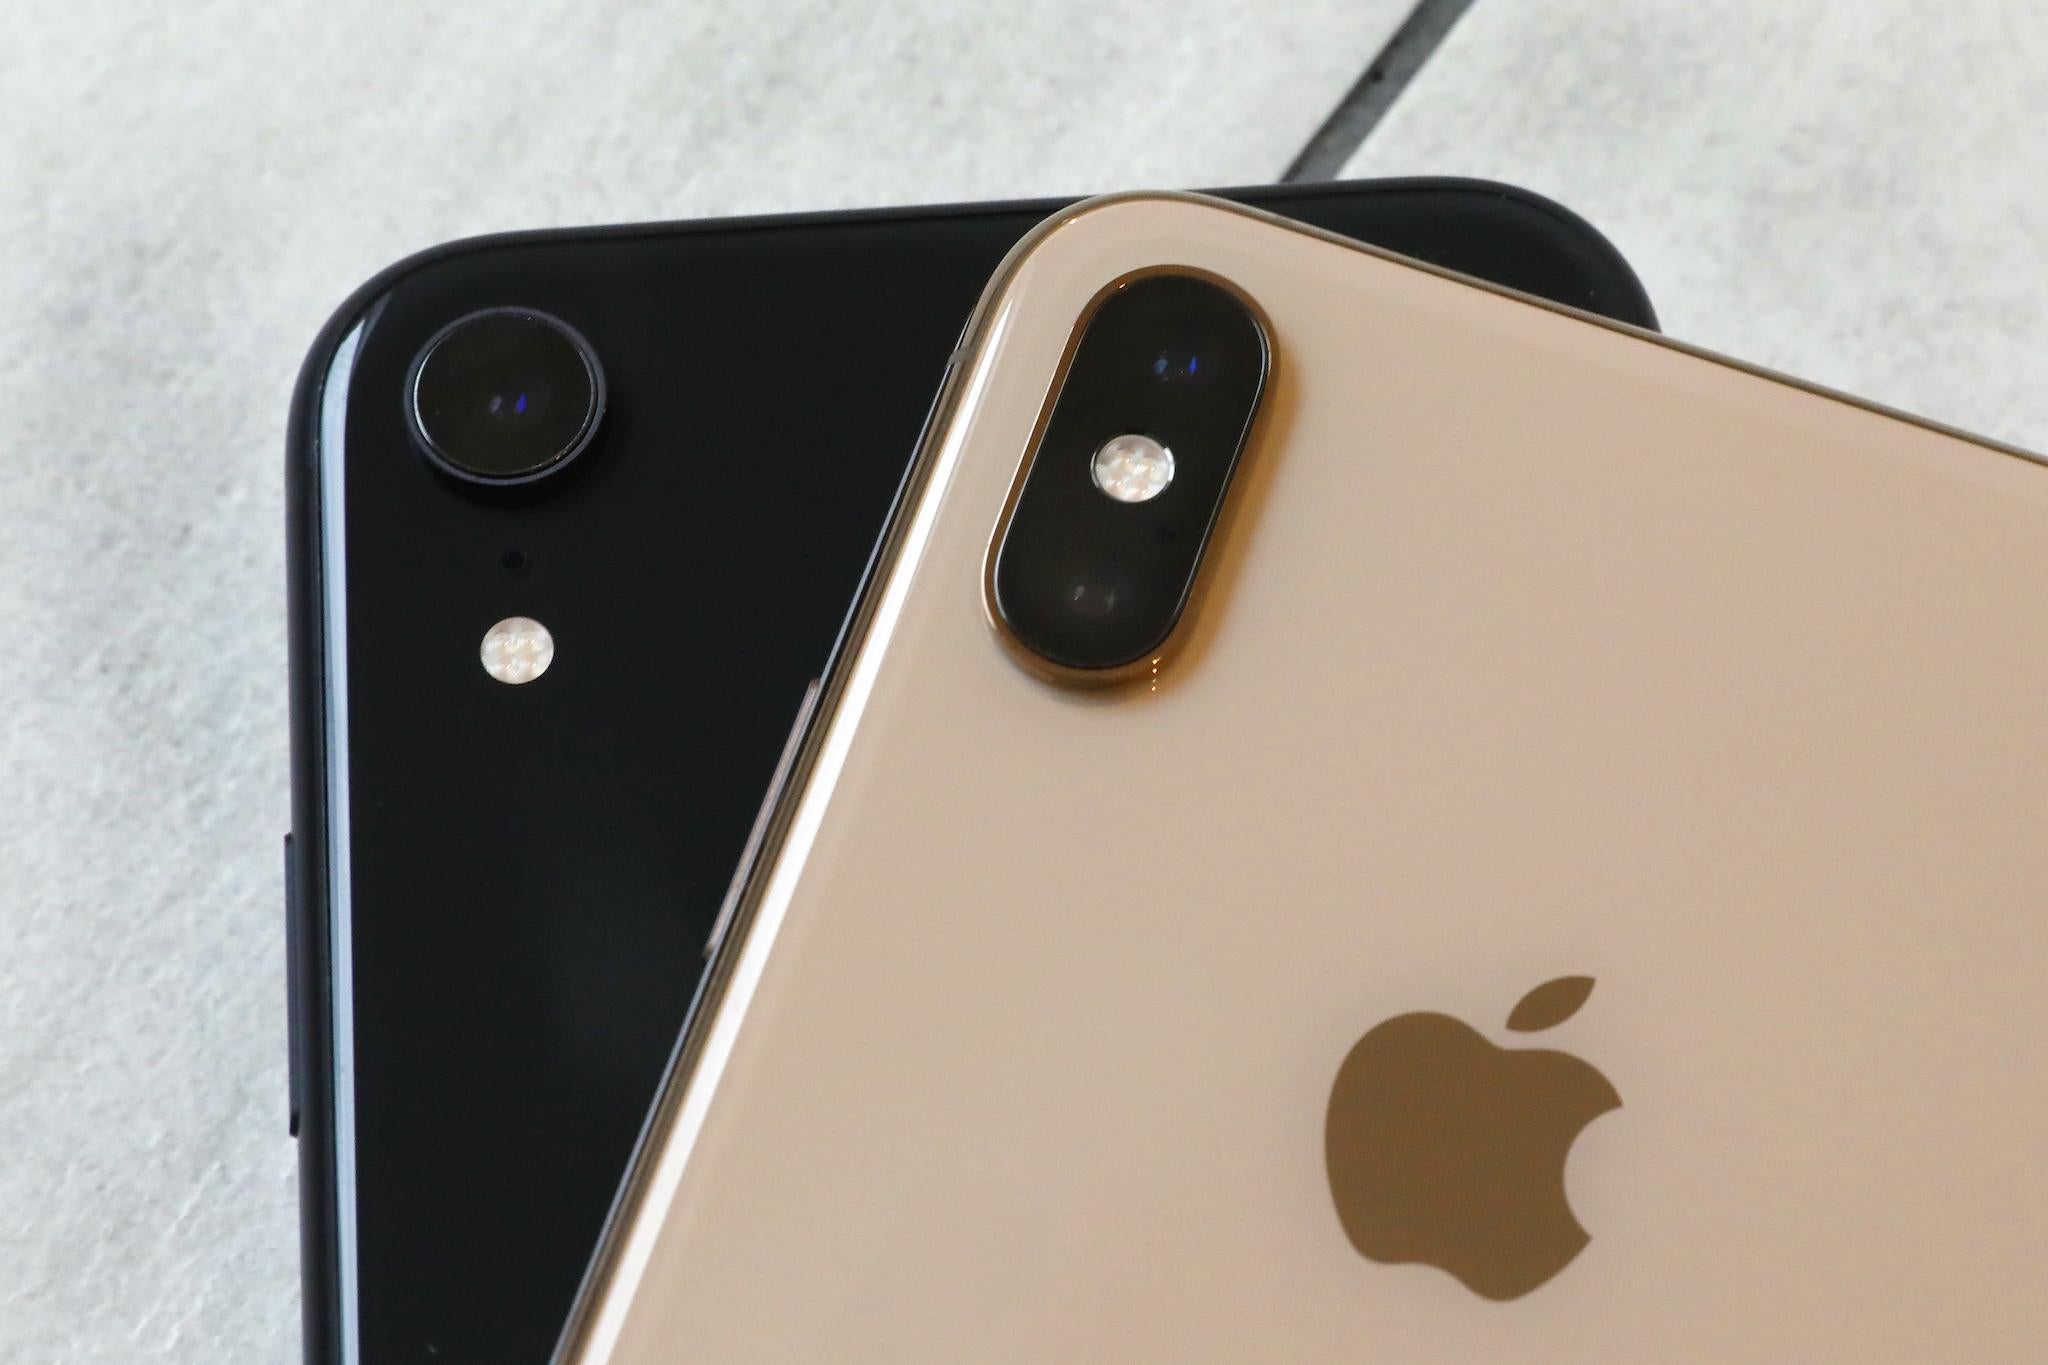 This Oct. 22, 2018, file photo shows the iPhone XR, left, that has a single lens, and the iPhone XS Max that has two lenses, in New York